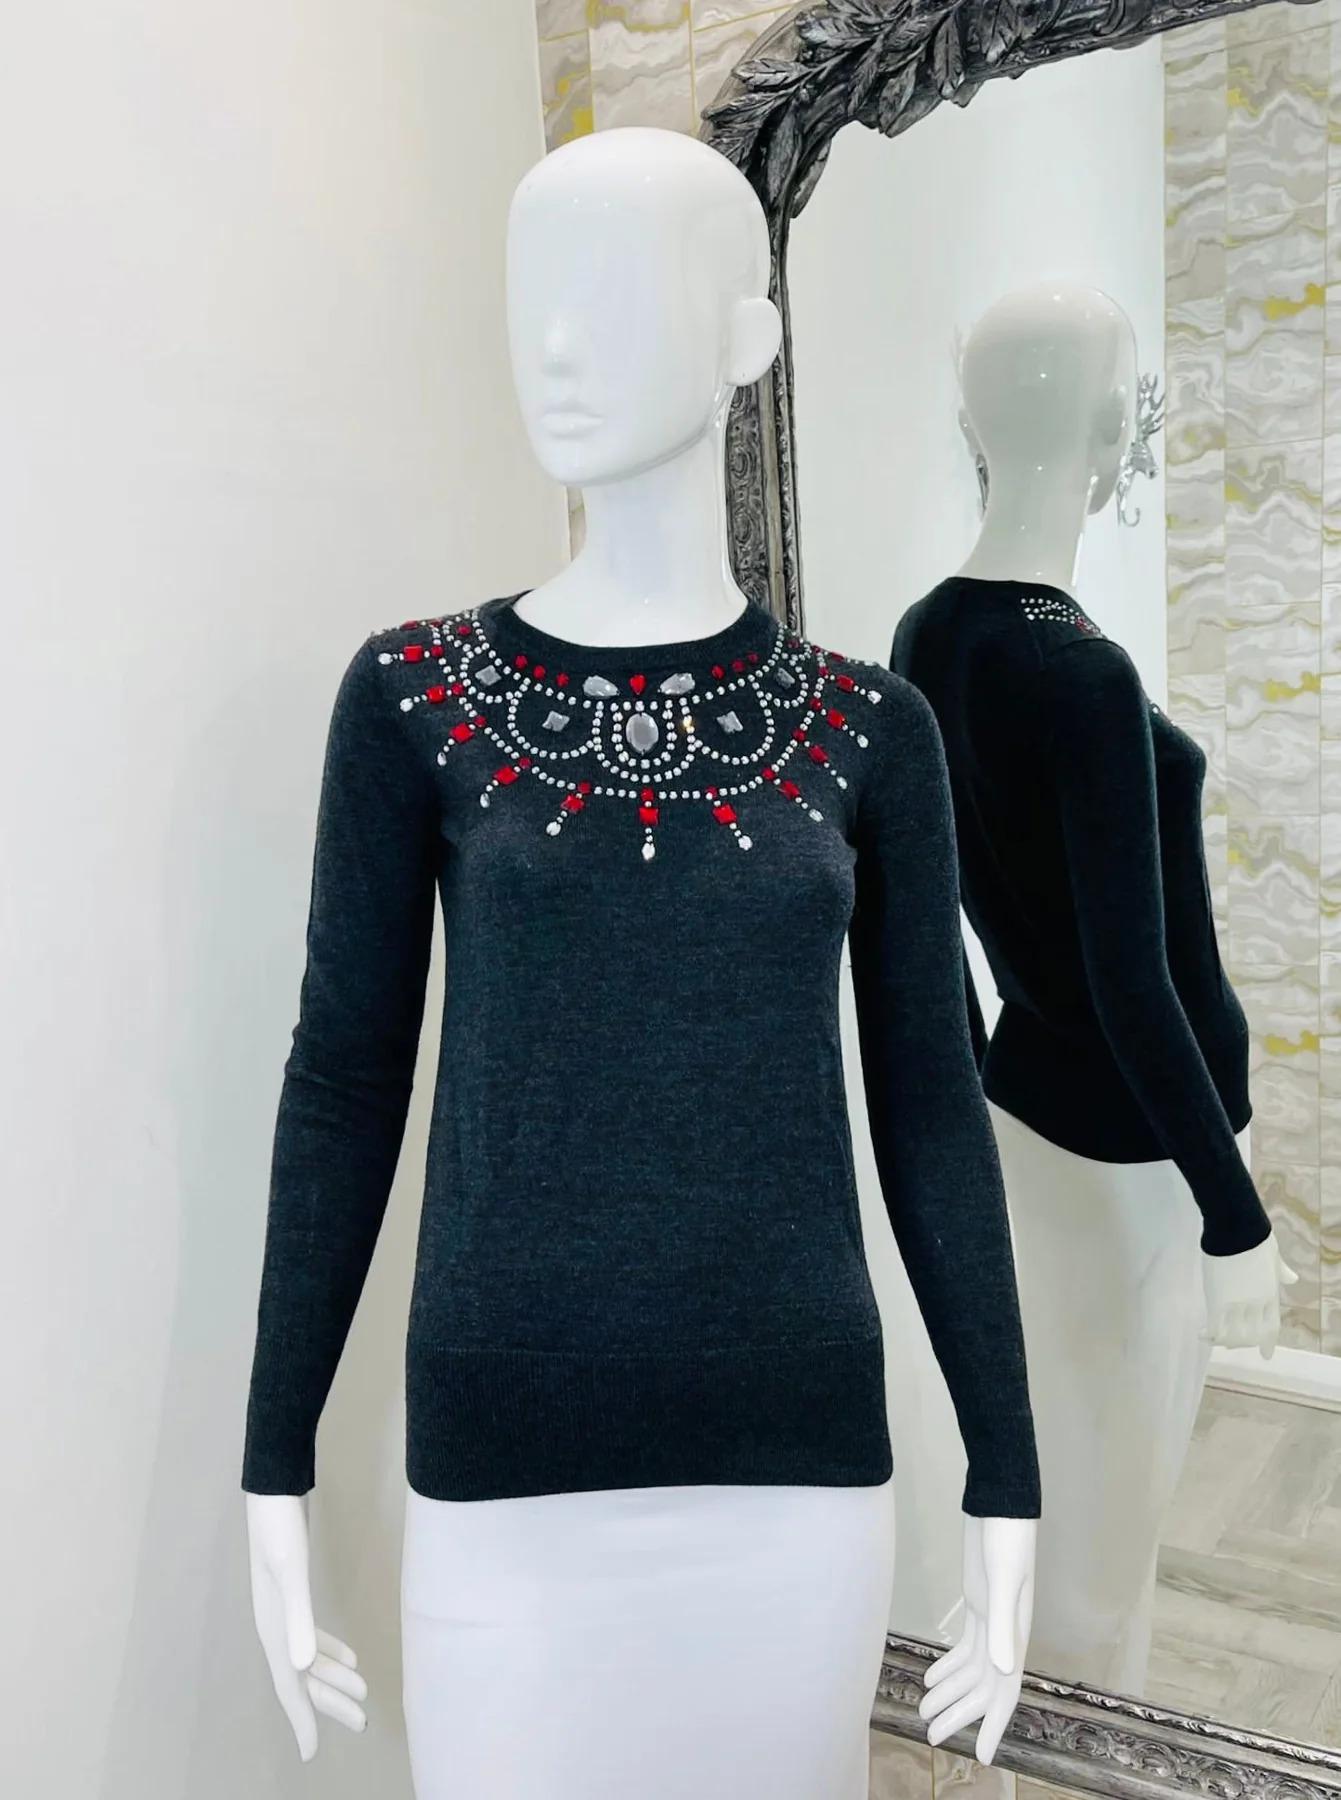 Markus Lupfer Merino Wool & Crystal Jumper

Dark grey knitted sweater with crystal/jewelled neckline.

Additional information:
Size – XS
Composition- Merino Wool, Crystal
Condition – Very Good